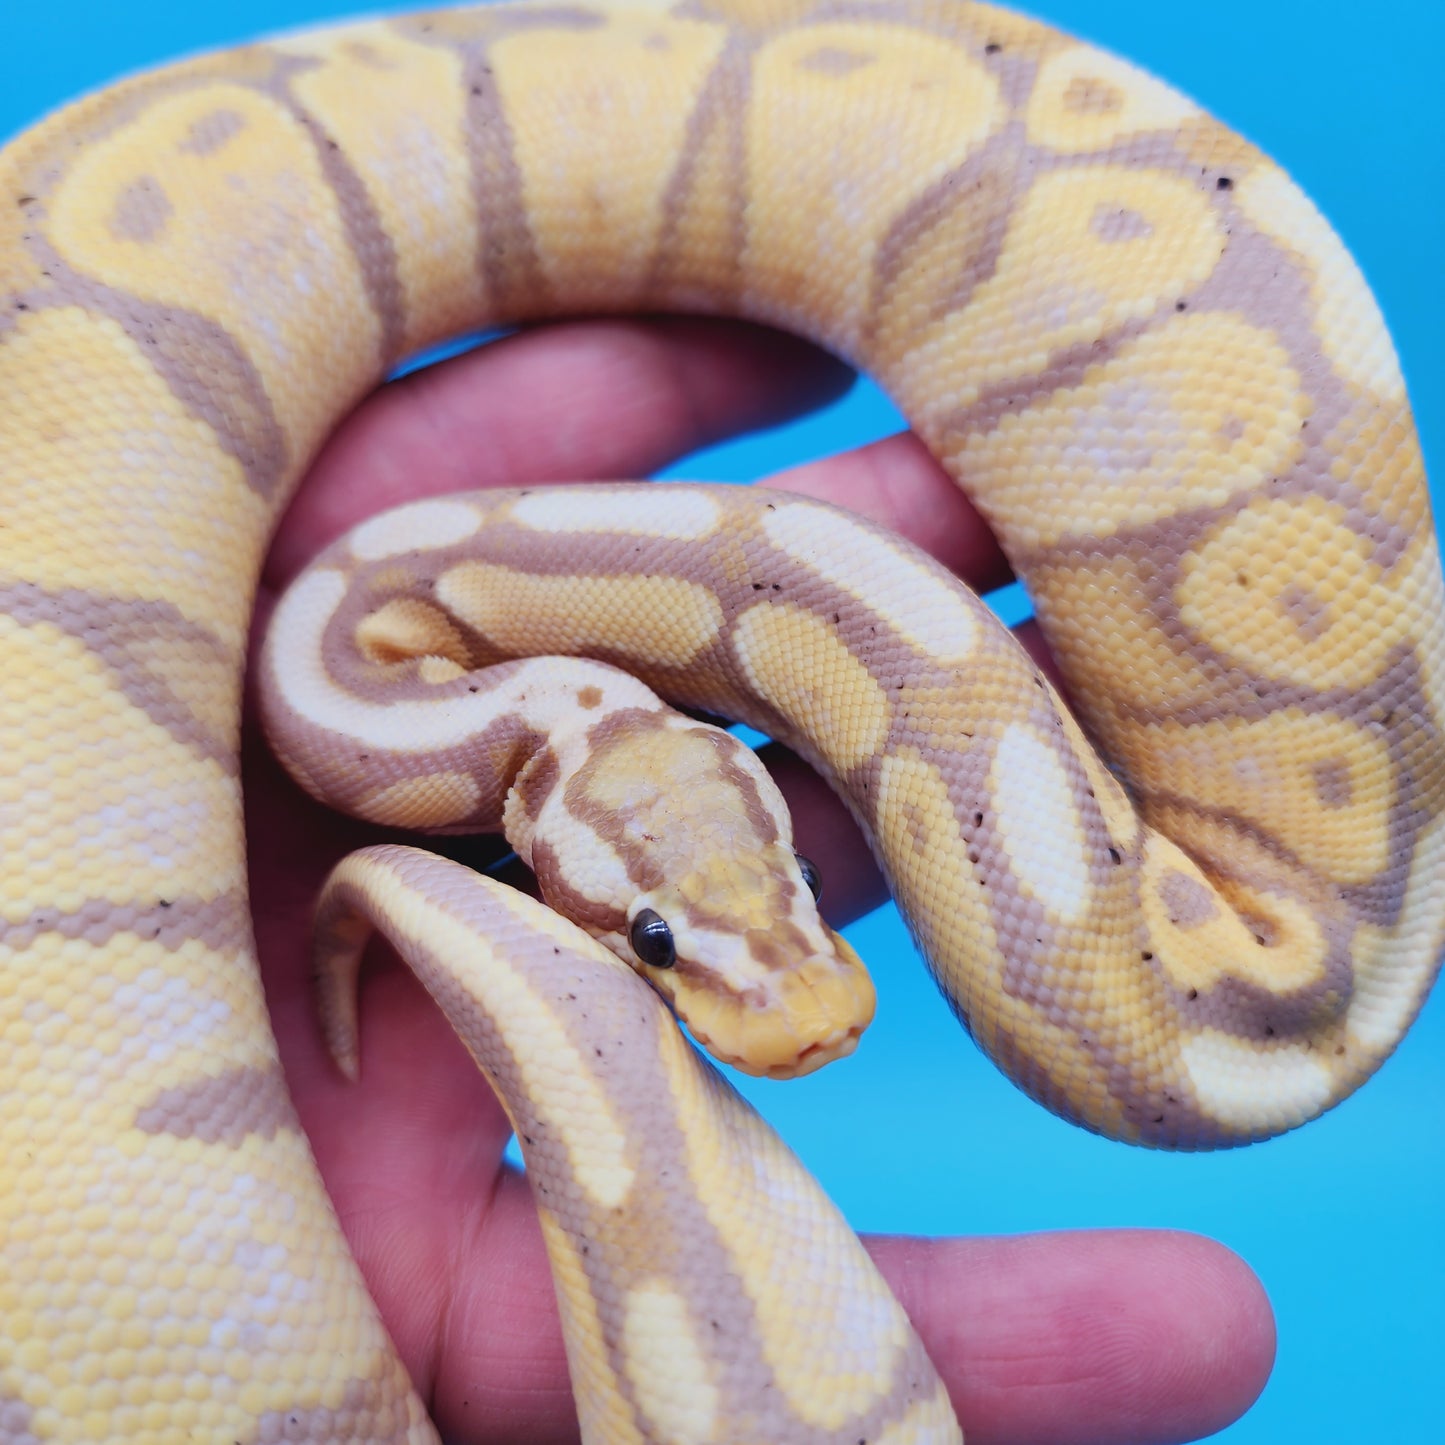 Male Banana Super Pastel 100% Het Puzzle (Possible Mojave/YB/Fluff)